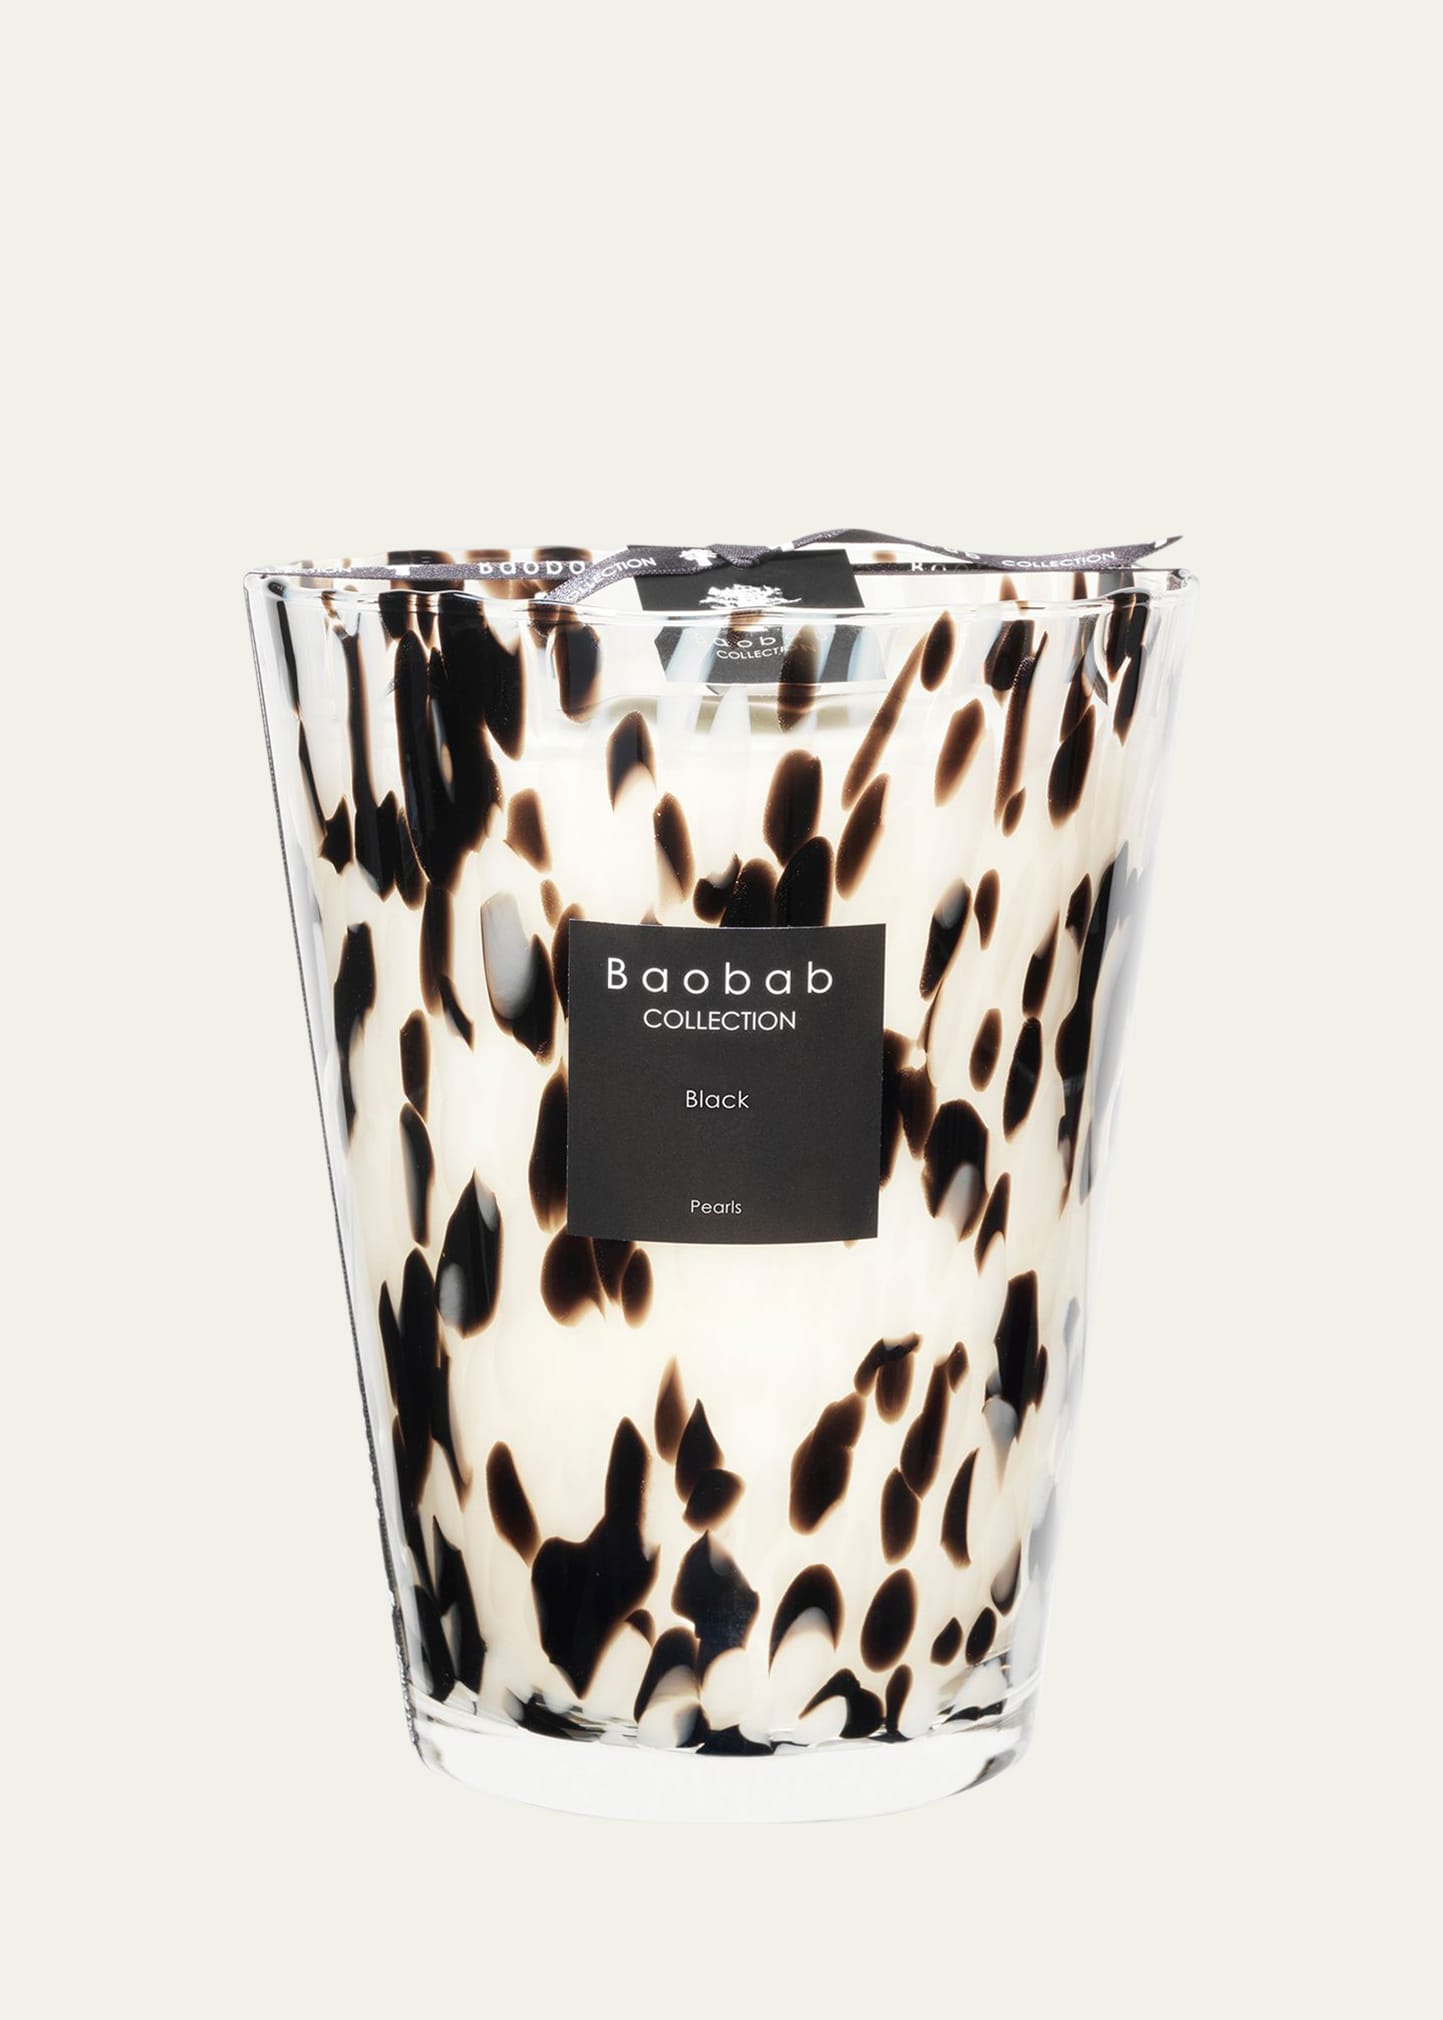 Baobab Collection Black Pearls Scented Candle, 9.4"